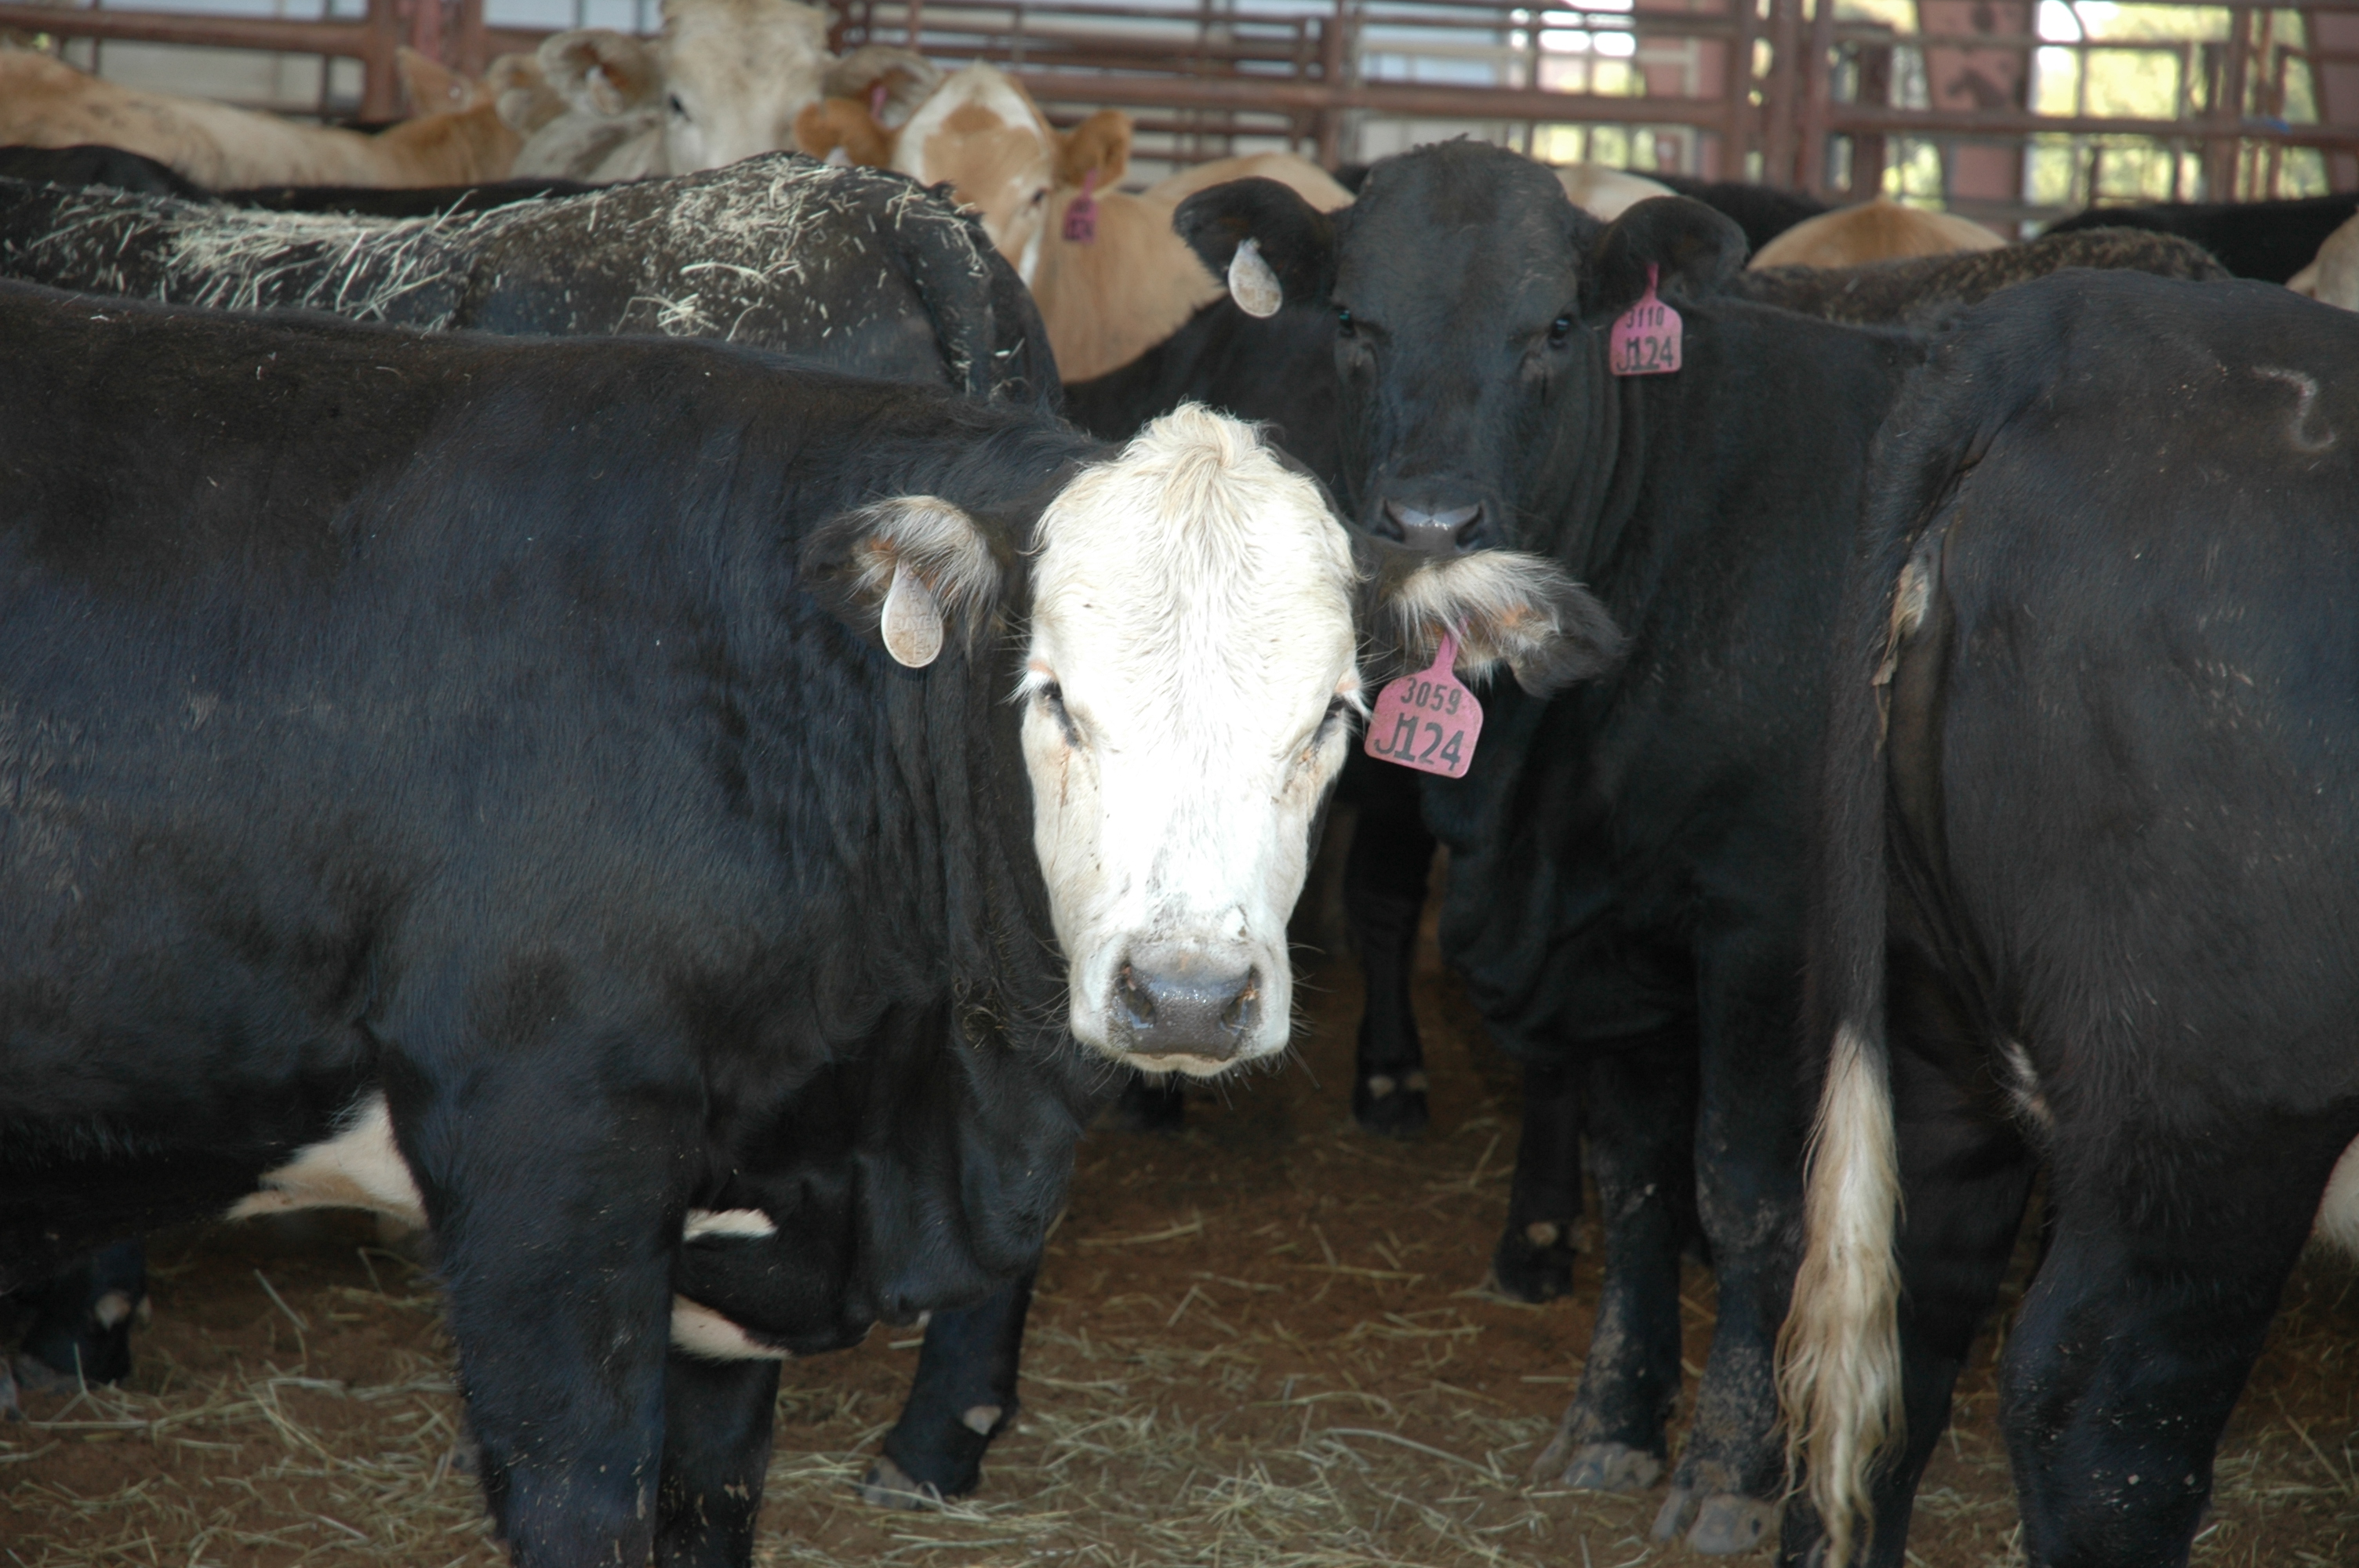 As prices for calves continue to reach historic levels, beef cattle producers could see increased revenue by implementing cost-effective calf management practices, according to Texas A&M AgriLife Extension Service economists. (Texas A&M AgriLife Extension Service photo by Blair Fannin)